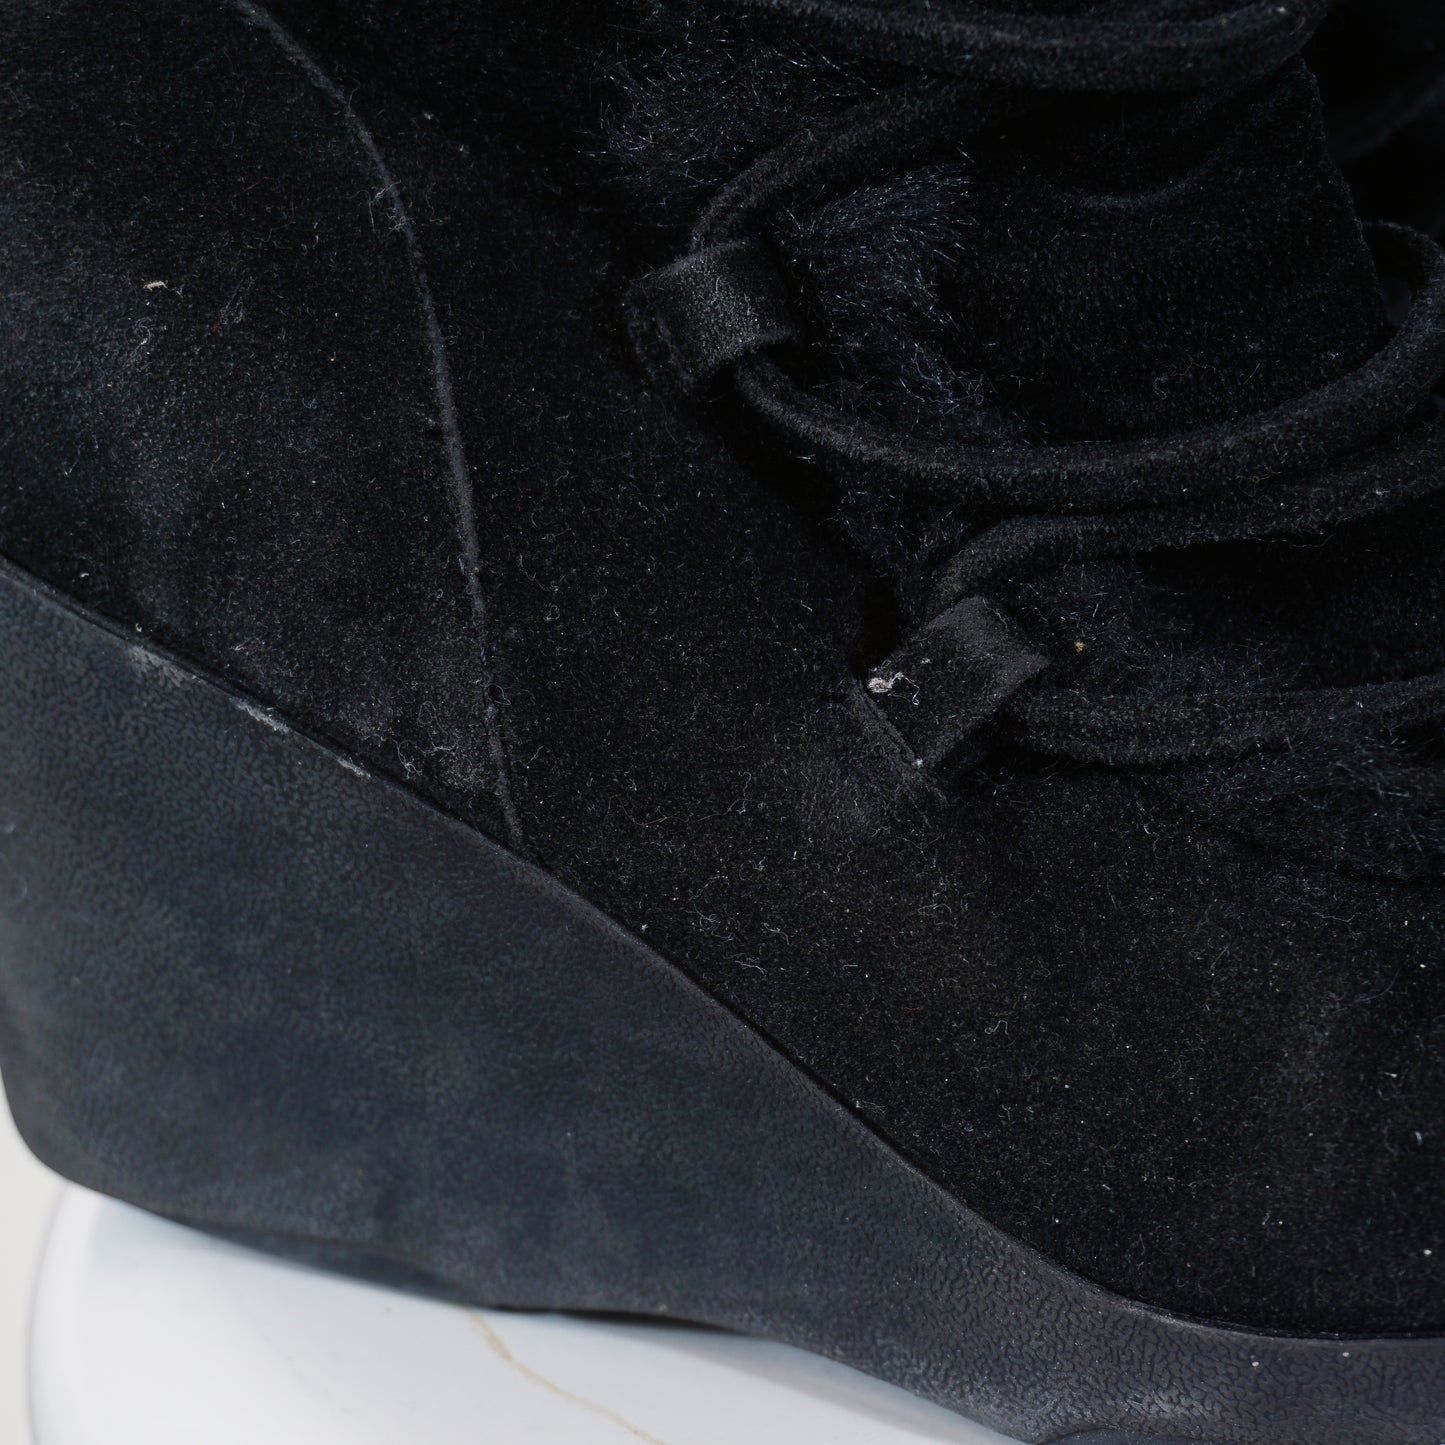 Breckelle's Faux Suede High Boots (7 1/2)